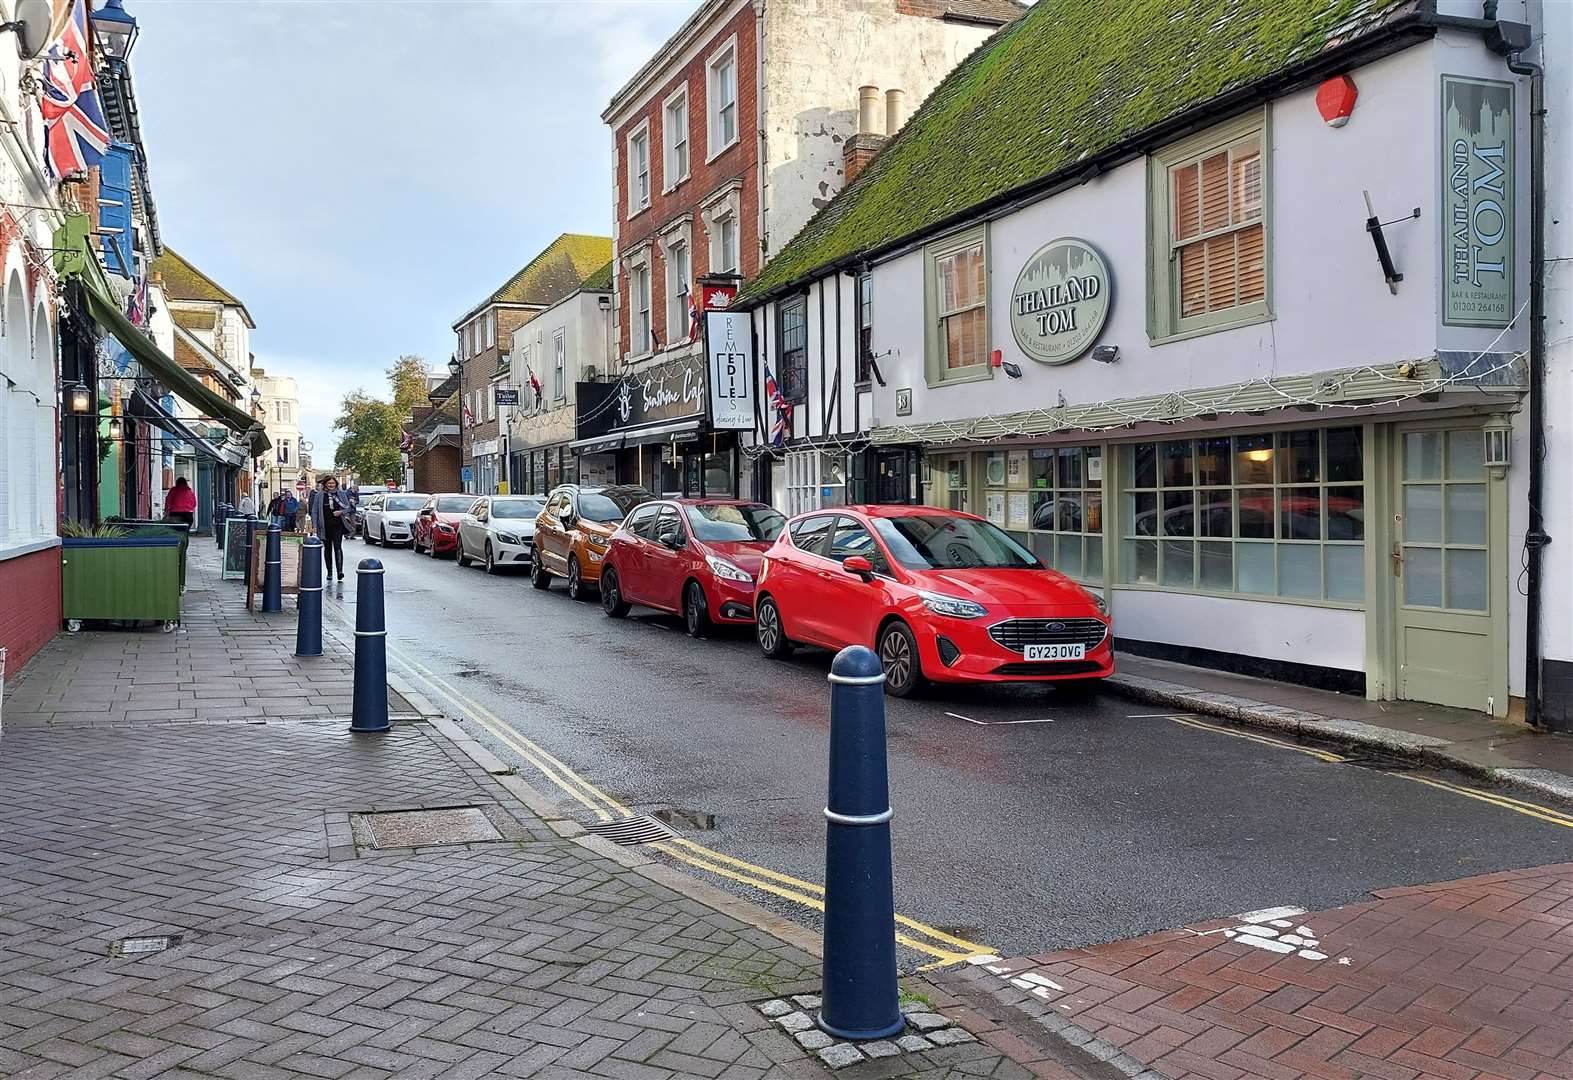 Traders say the parking bays in Hythe are vital for footfall